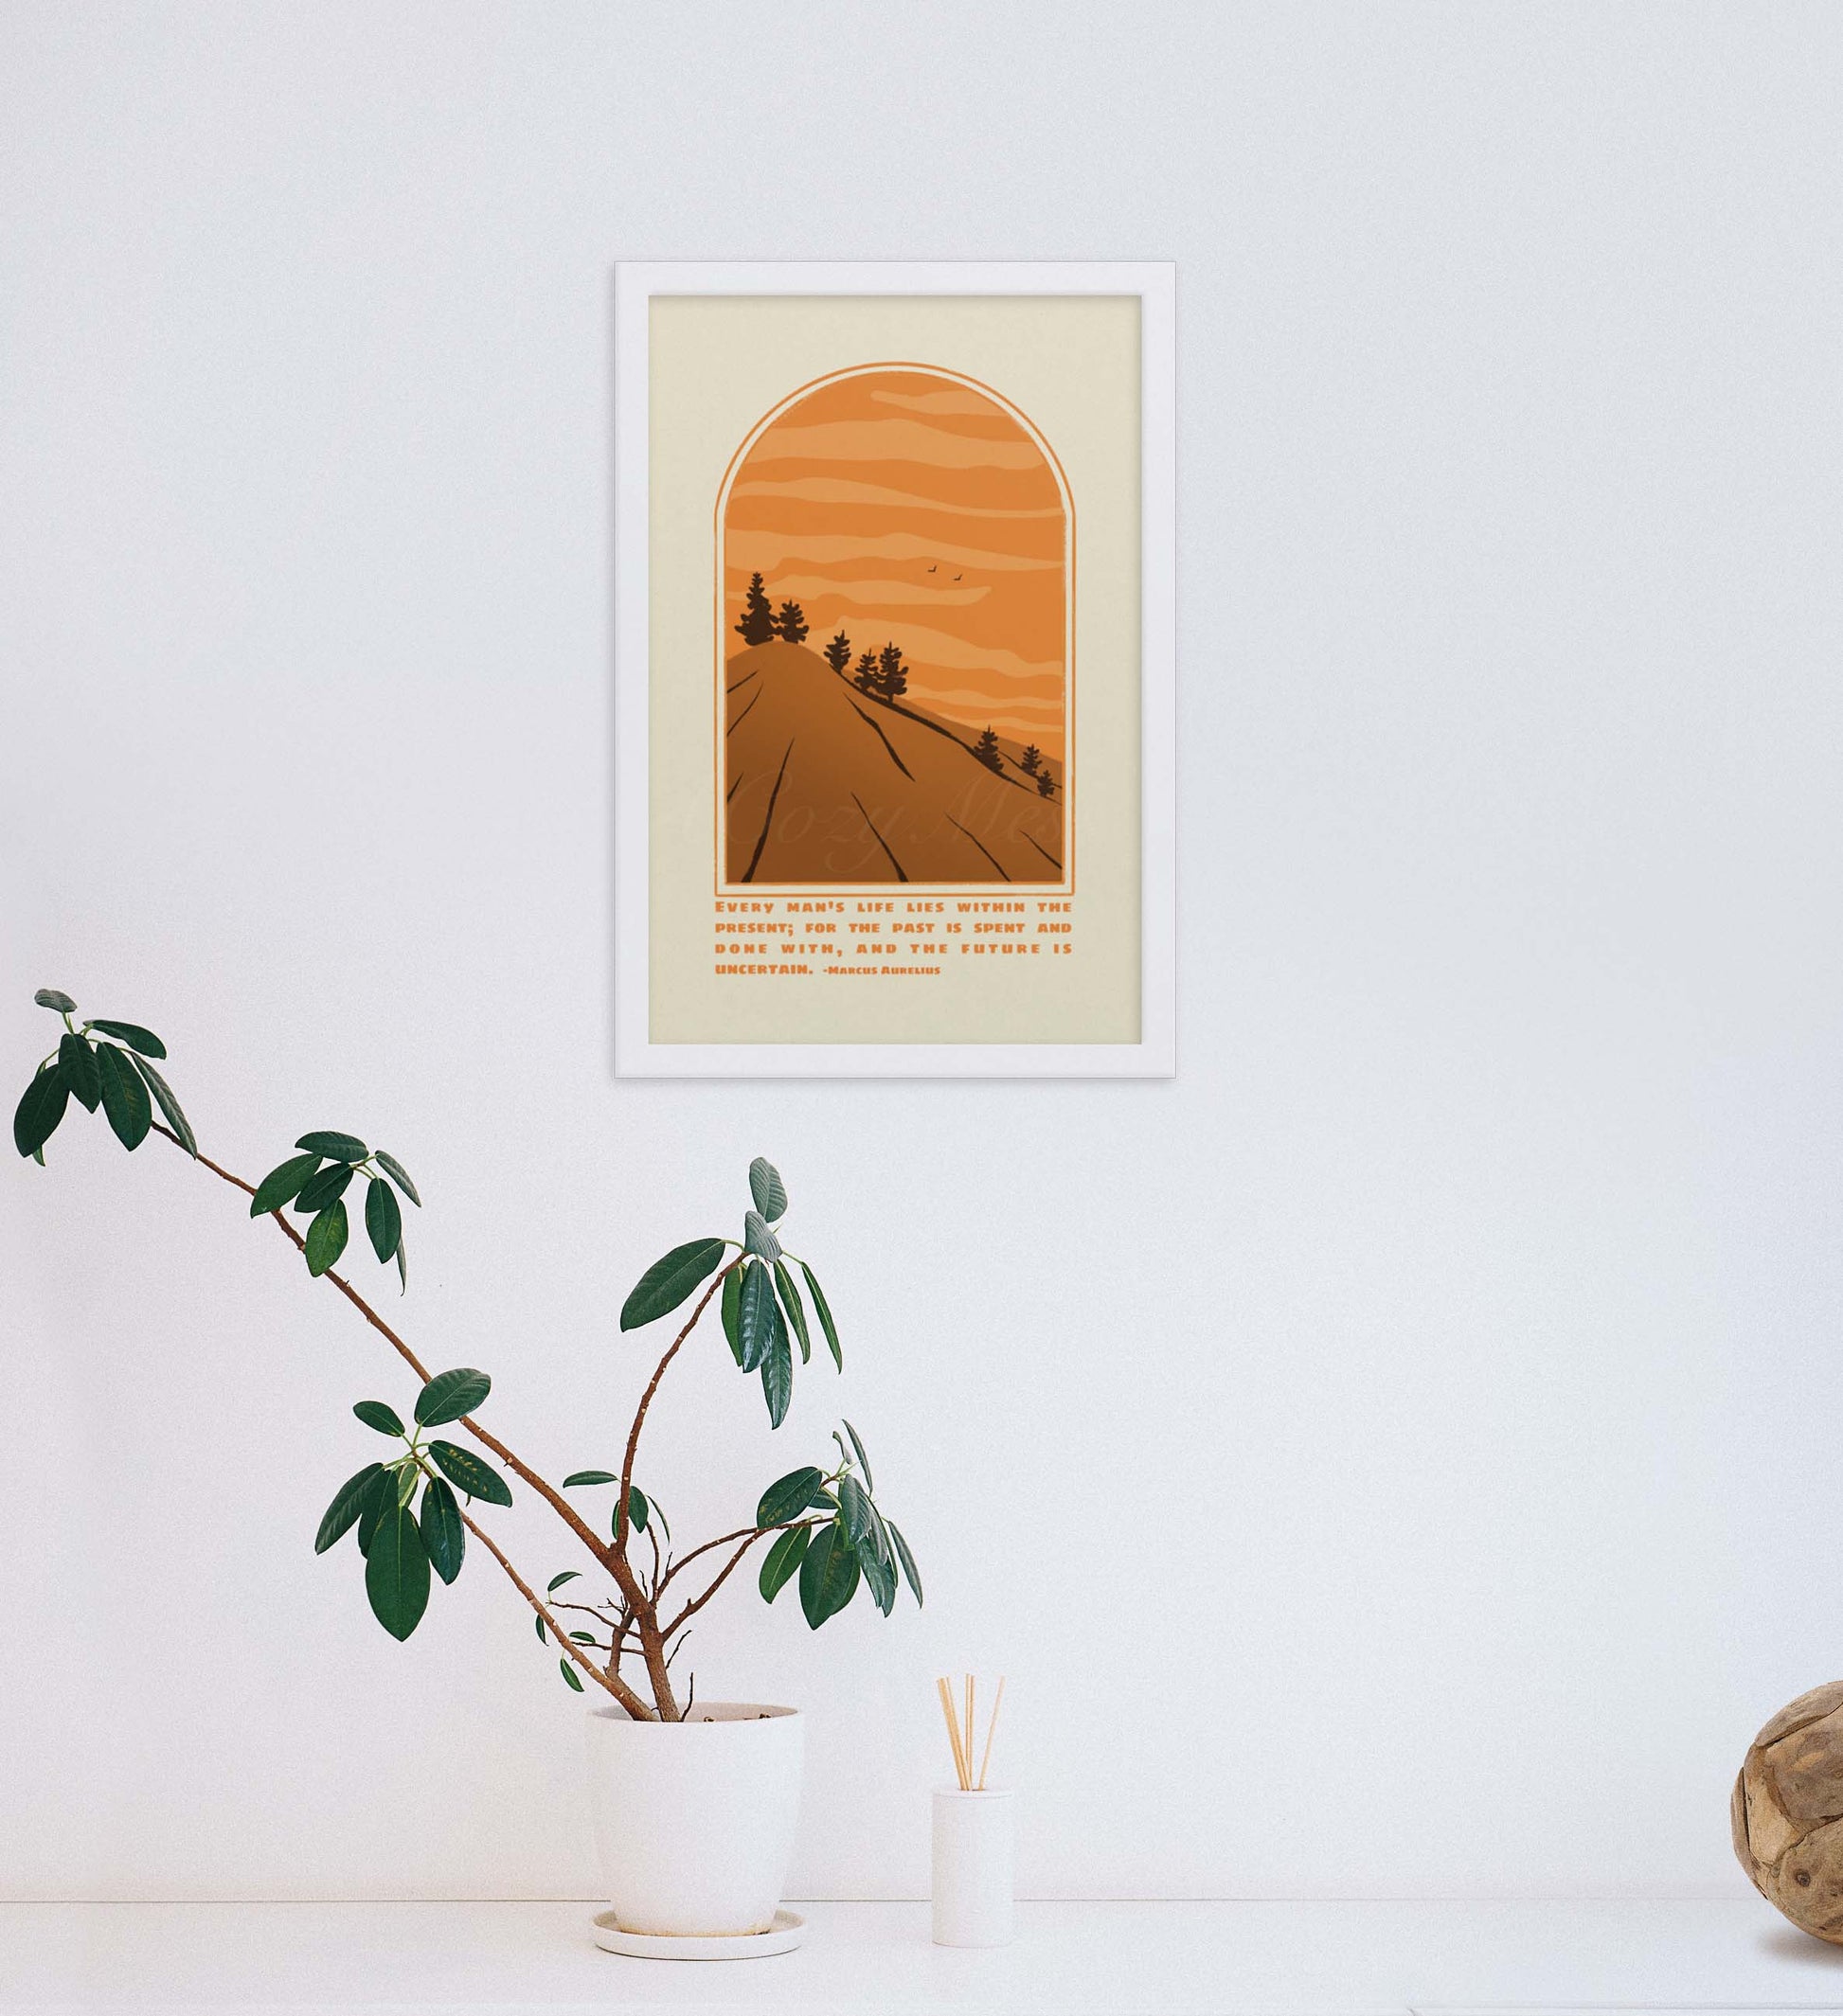 A framed art poster depicting an arch-shaped window view of a stylized landscape with a road leading towards the horizon, flanked by silhouetted pine trees against a backdrop of orange sky with layered clouds. At the bottom is a quote from Marcus Aurelius in a clea